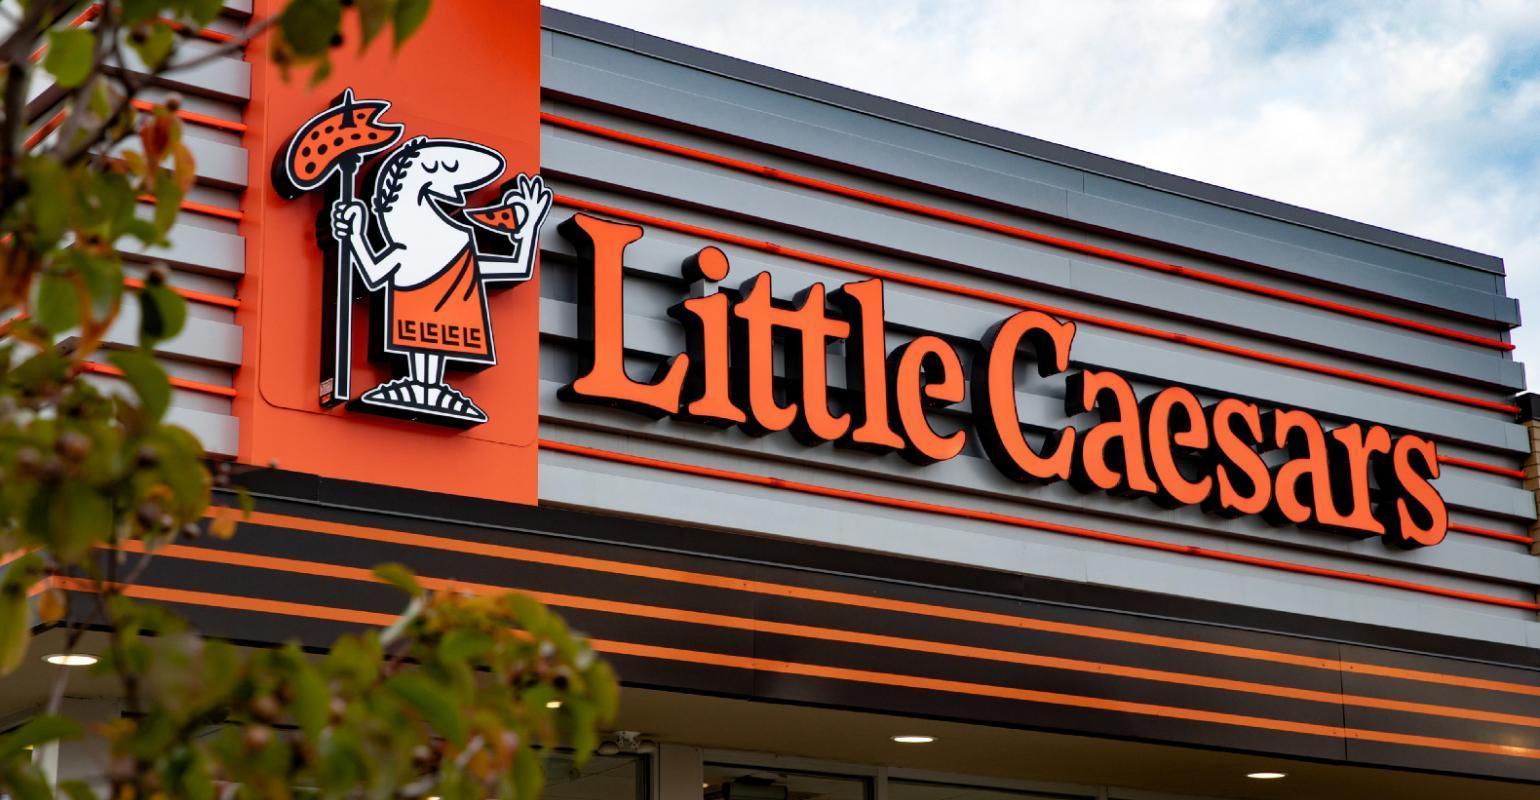 How Little Caesars is leveraging tech investment and development to gain a foothold in the pizza wars